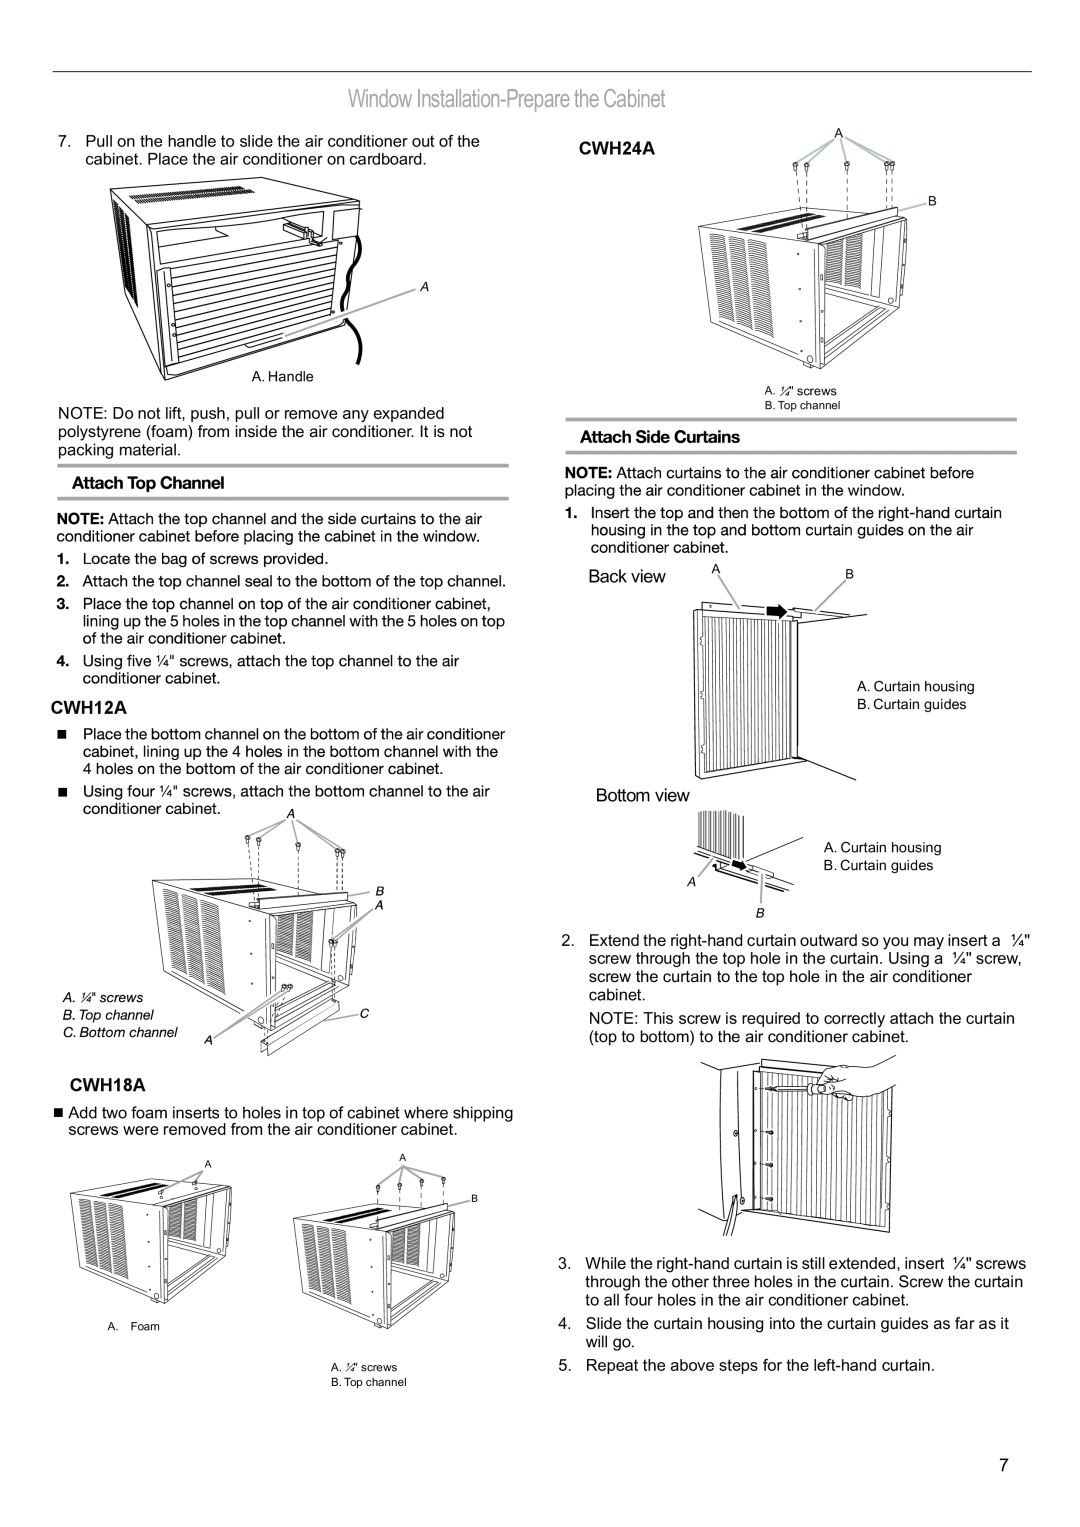 Haier CWH24A manual Window Installation-Preparethe Cabinet, Back view, CWH12A, CWH18A, Bottom view 